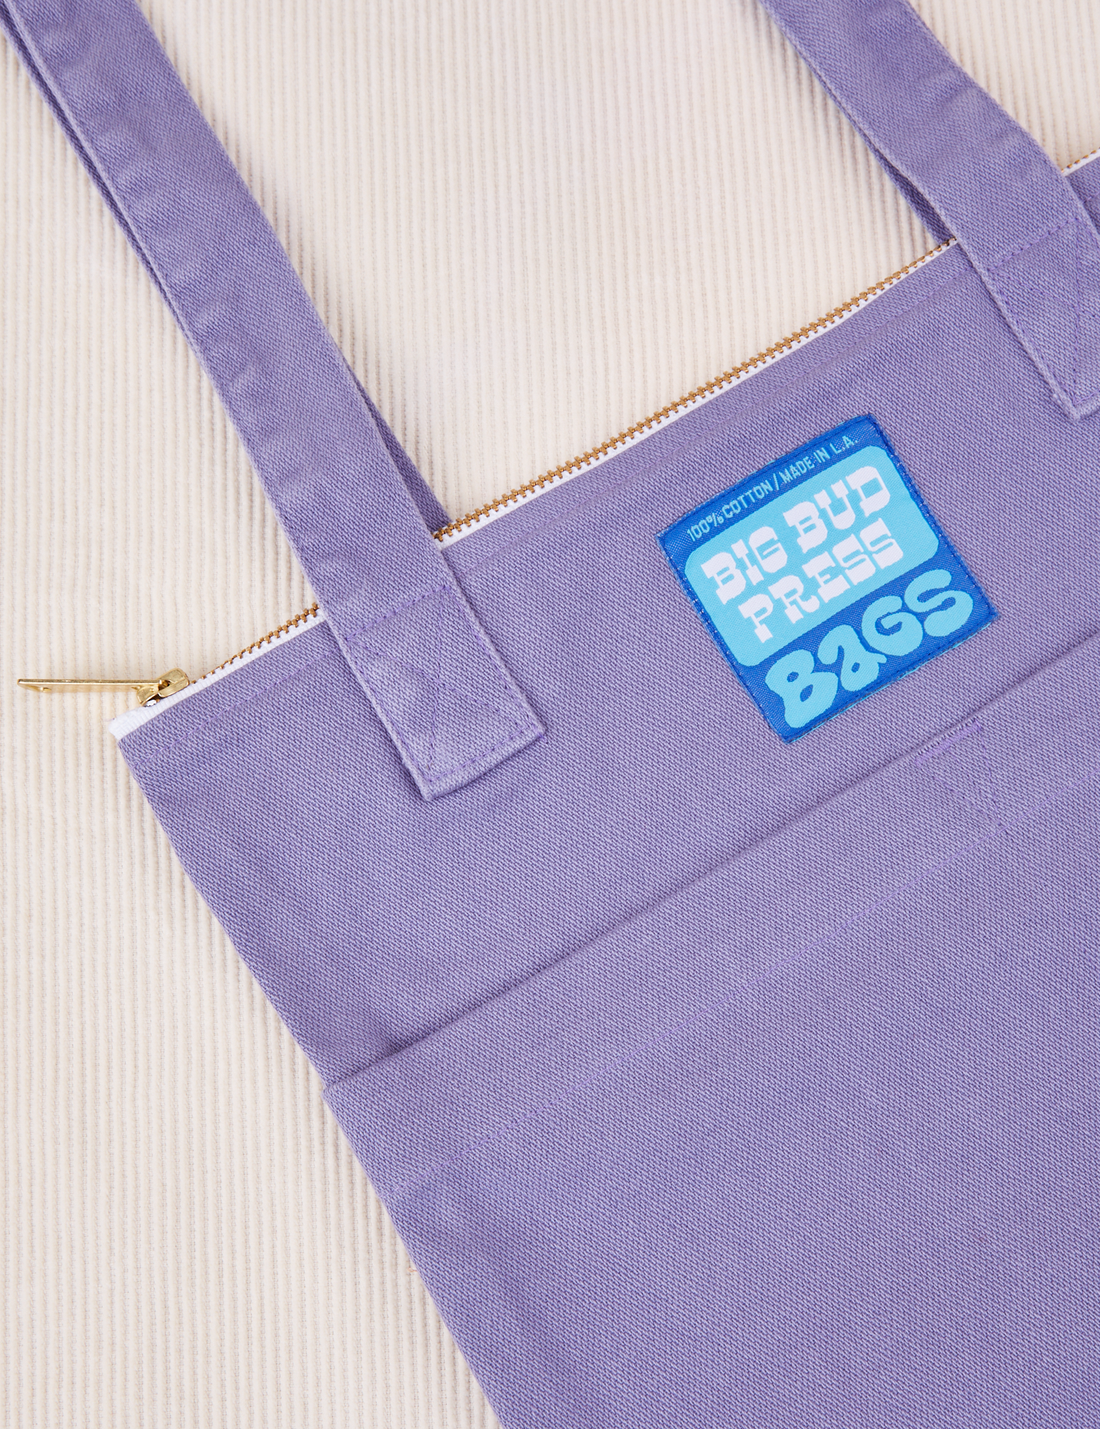 Over-Shoulder Zip Mini Tote in Faded Grape with blue Big Bud press label